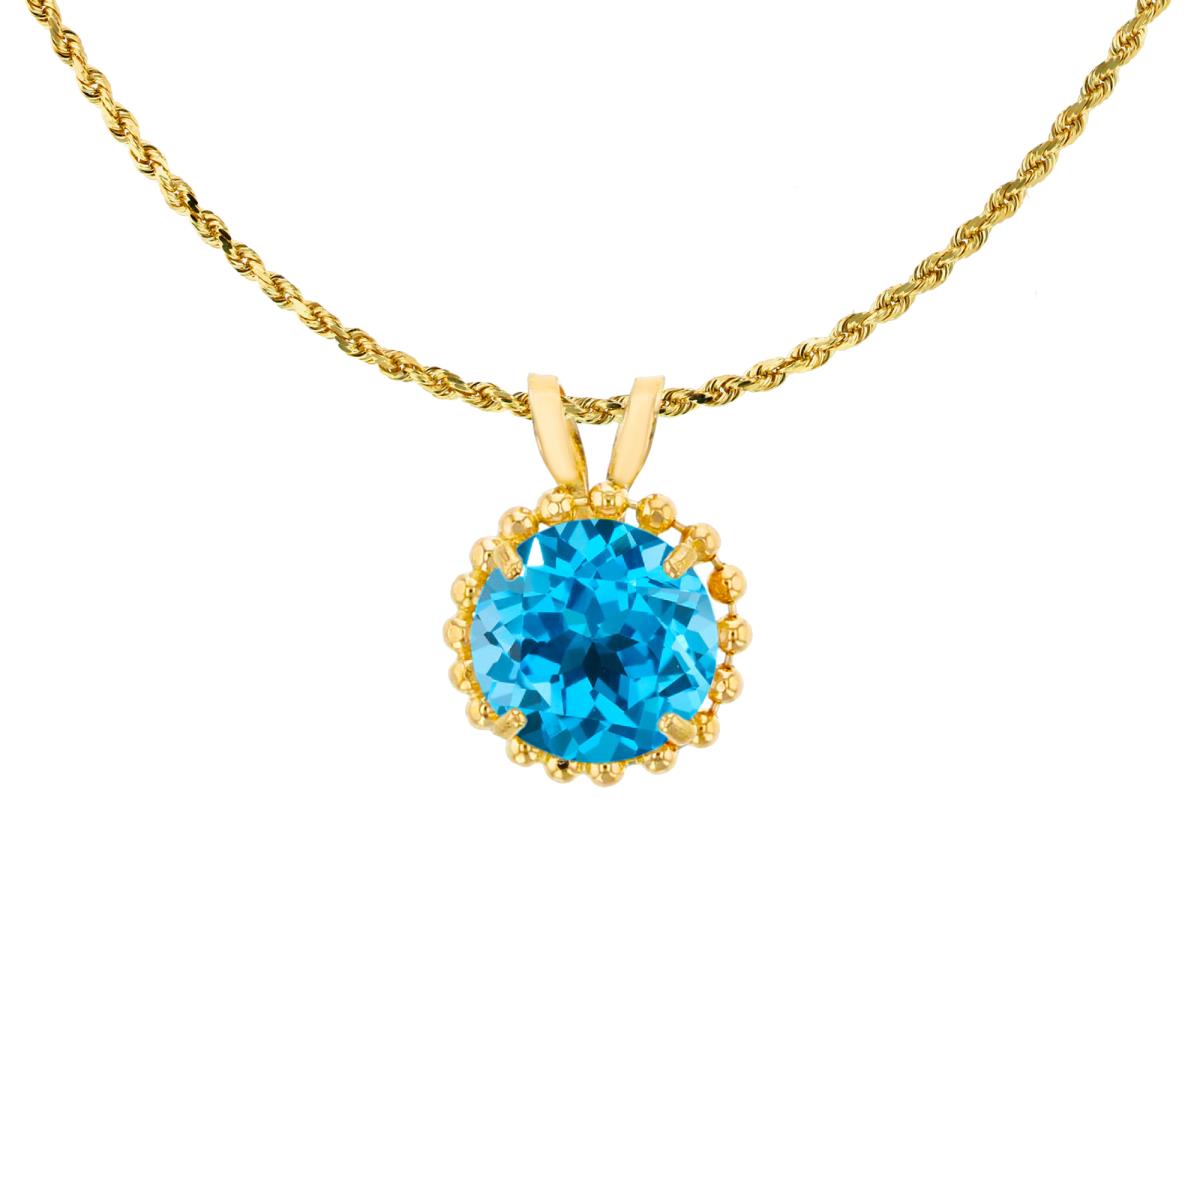 10K Yellow Gold 6mm Rd Cut Swiss Blue Topaz with Bead Frame Rabbit Ear 18" Necklace